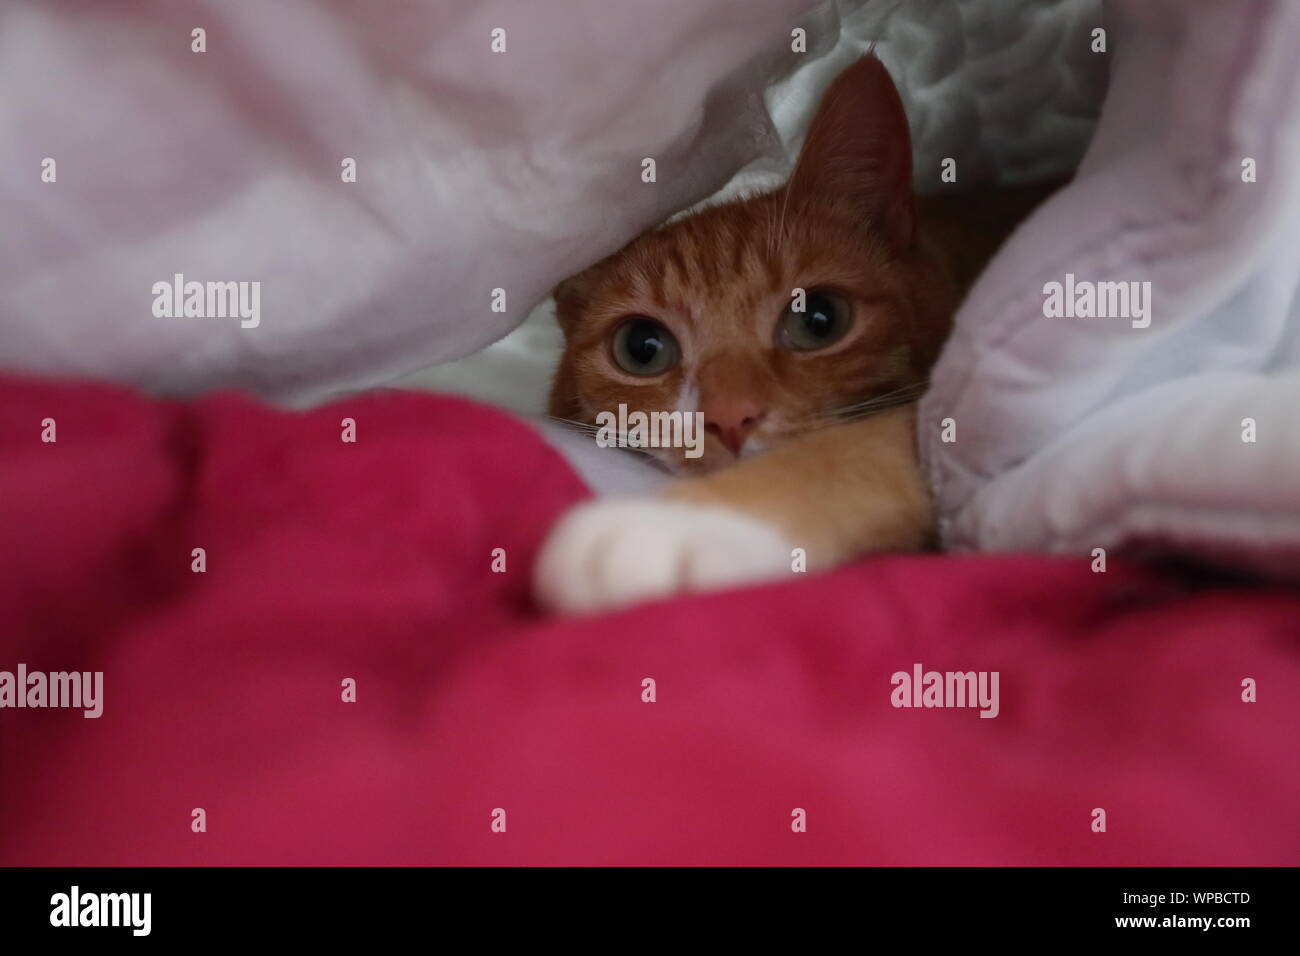 Our ginger cat, Ginger, peeping out from under a duvet Stock Photo